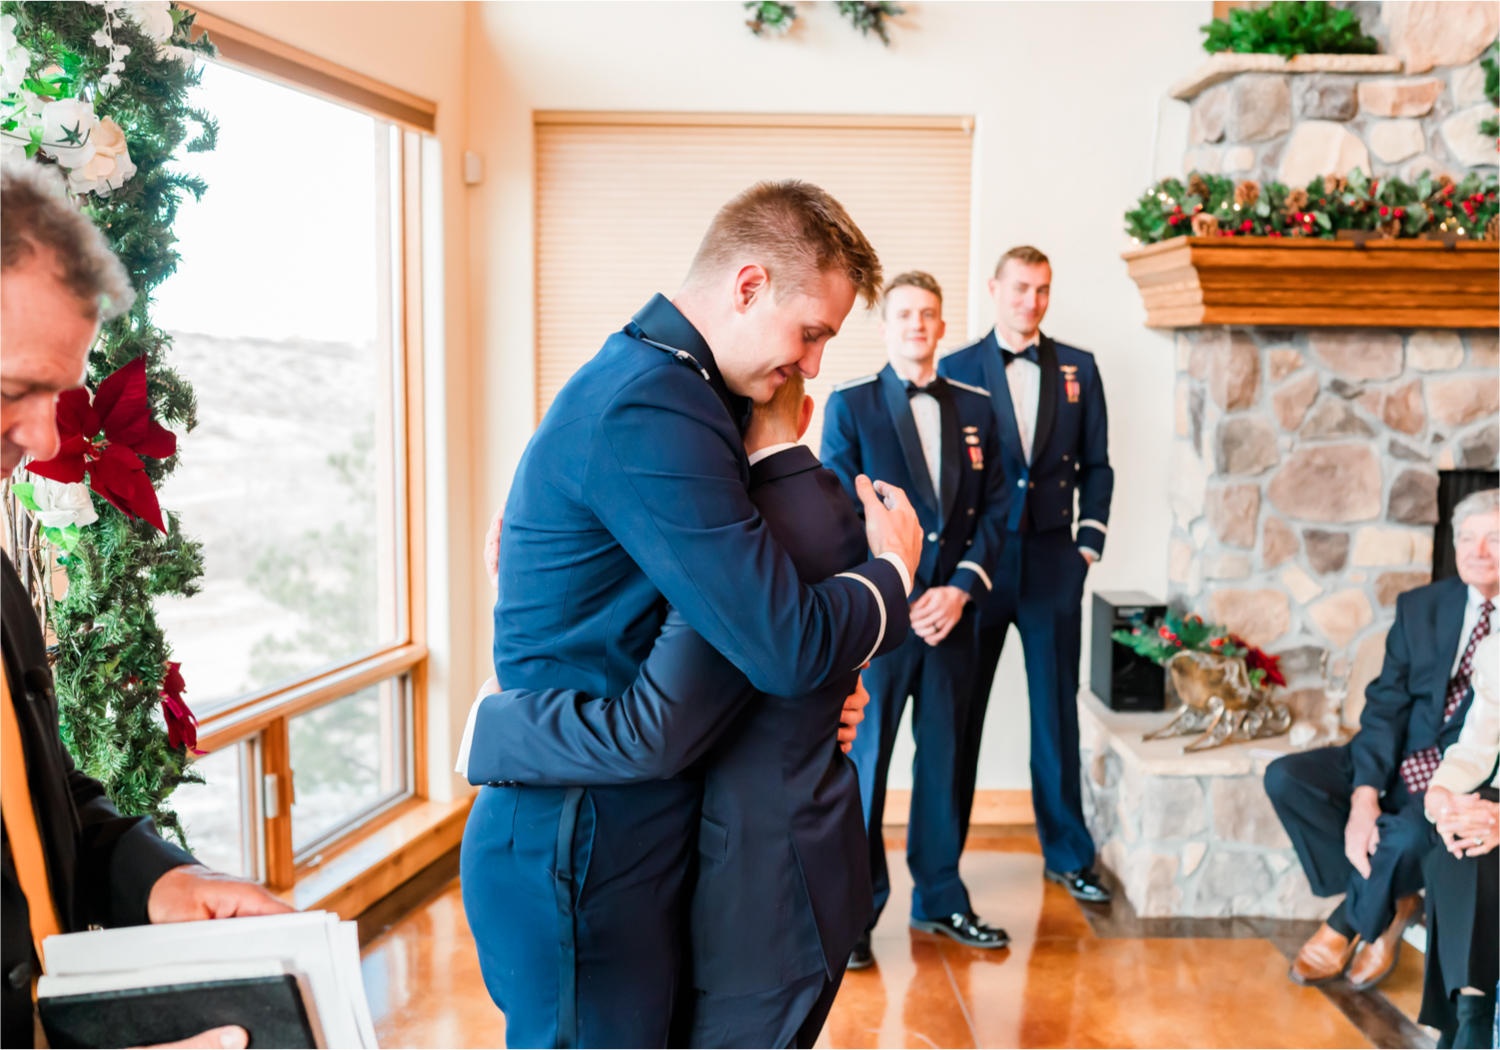 Winter Wonderland Wedding in Colorado Springs | Britni Girard Photography Colorado Wedding Photography and Film Team | Snow covered mountains and Christmas just a few days away | Annika + John's Nostalgic Winter Wedding | Bride's Dress iDream Bridal Essence of Australia | Air Force Academy | Ceremony Entrance Rustic Cabin 